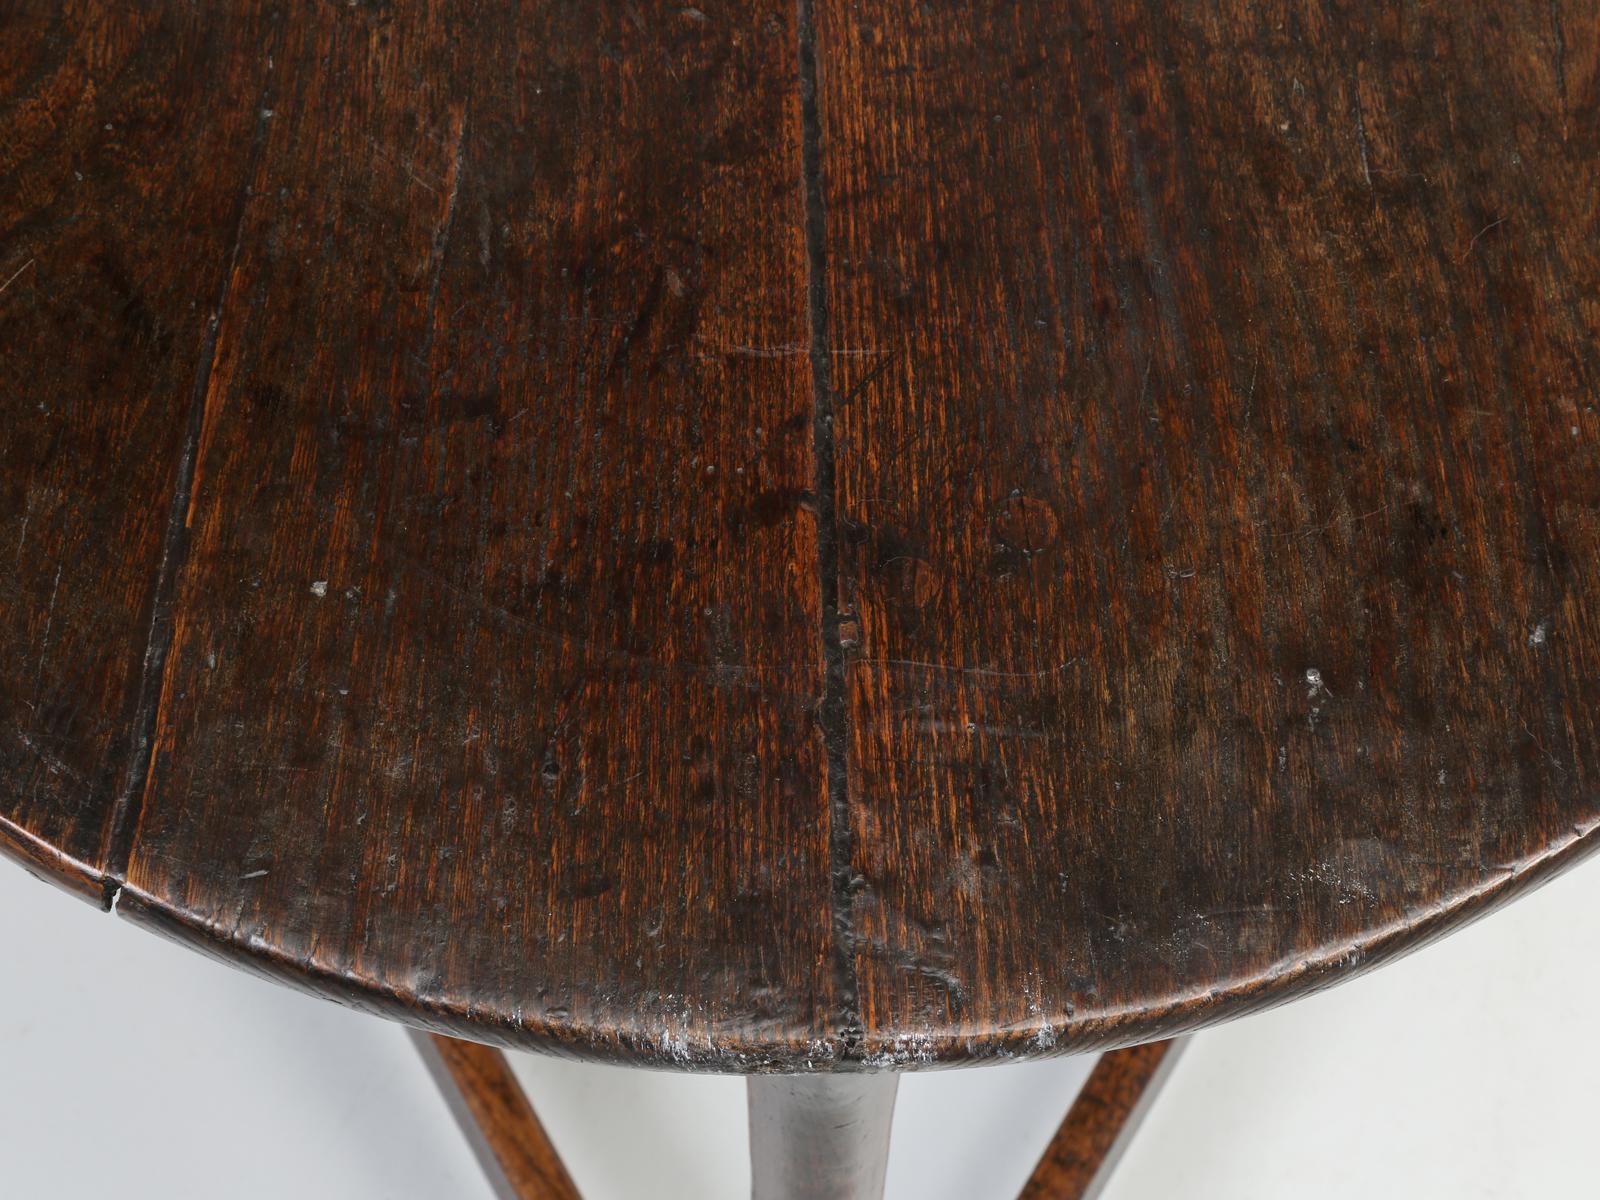 Country Antique English Cricket Table with a Great Original Patina, circa 1800s